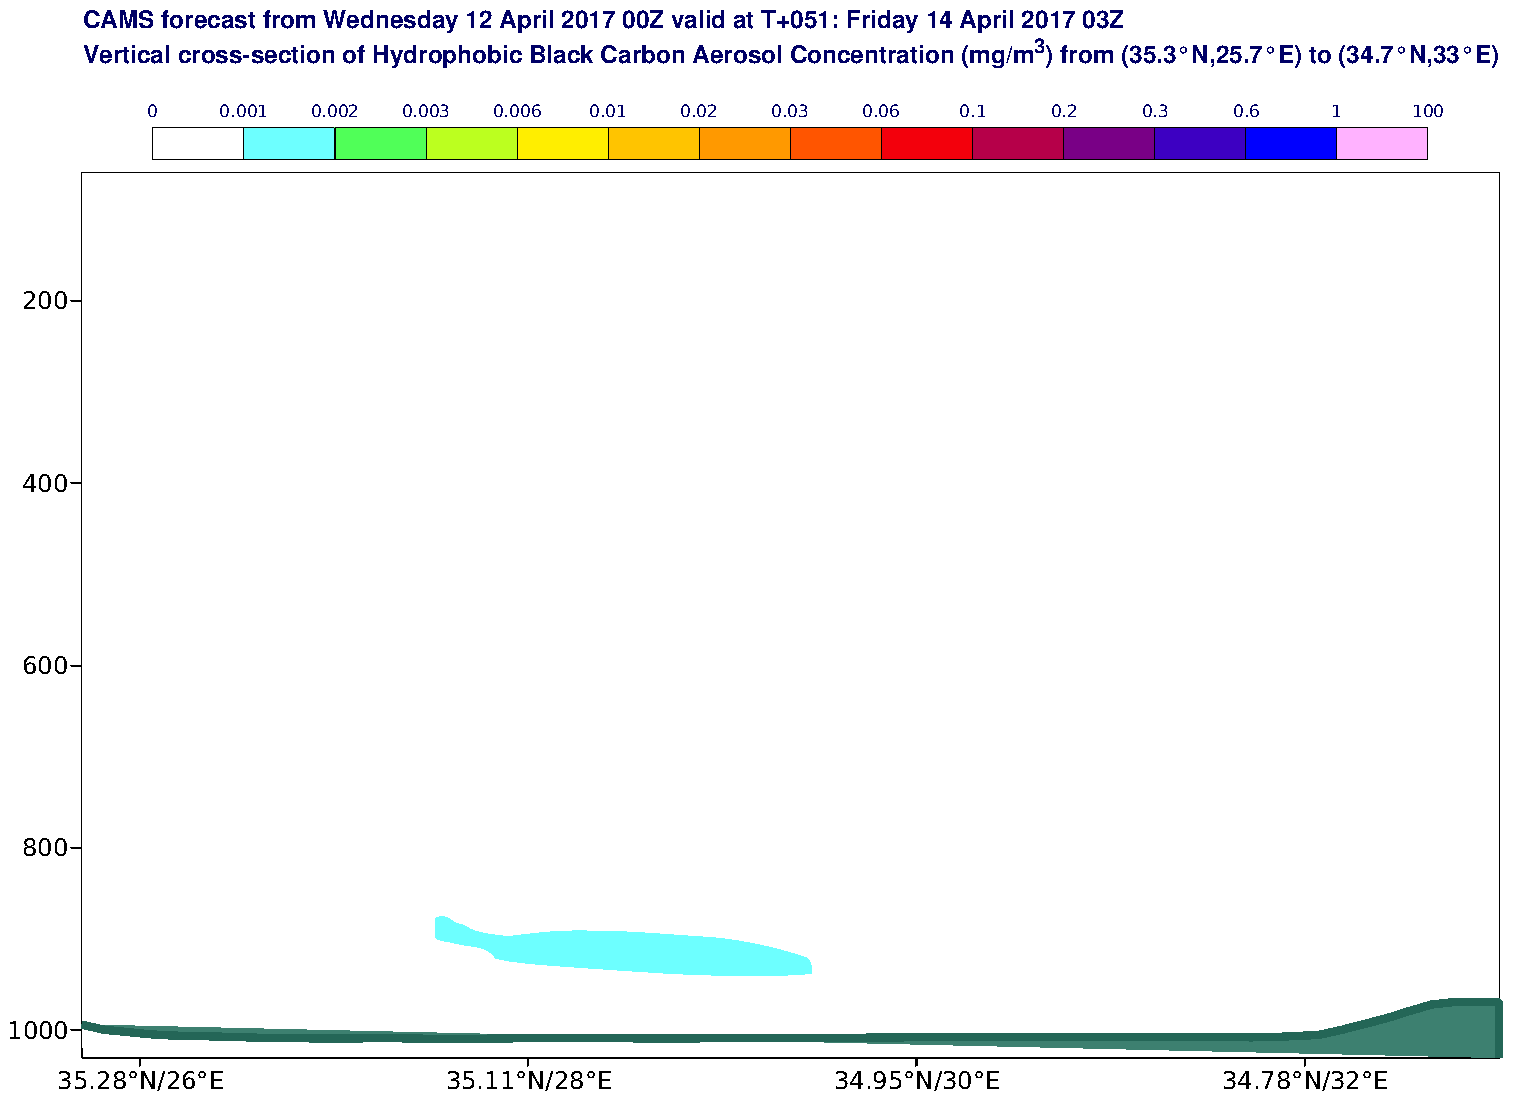 Vertical cross-section of Hydrophobic Black Carbon Aerosol Concentration (mg/m3) valid at T51 - 2017-04-14 03:00